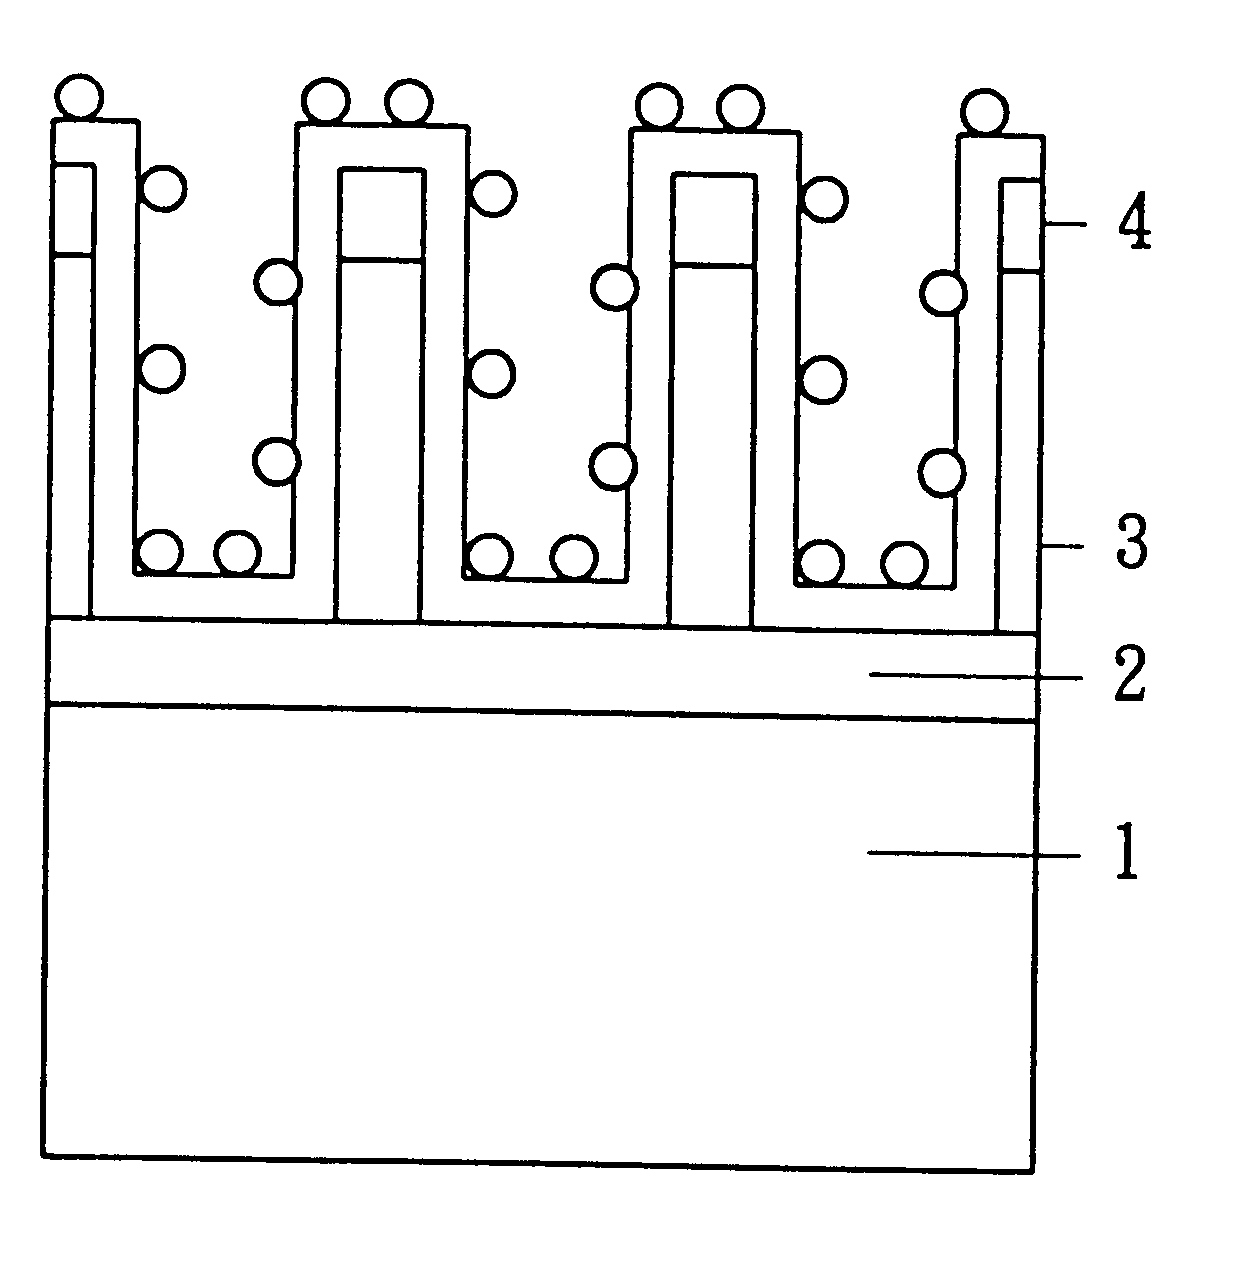 Seed layer of copper interconnection via displacement